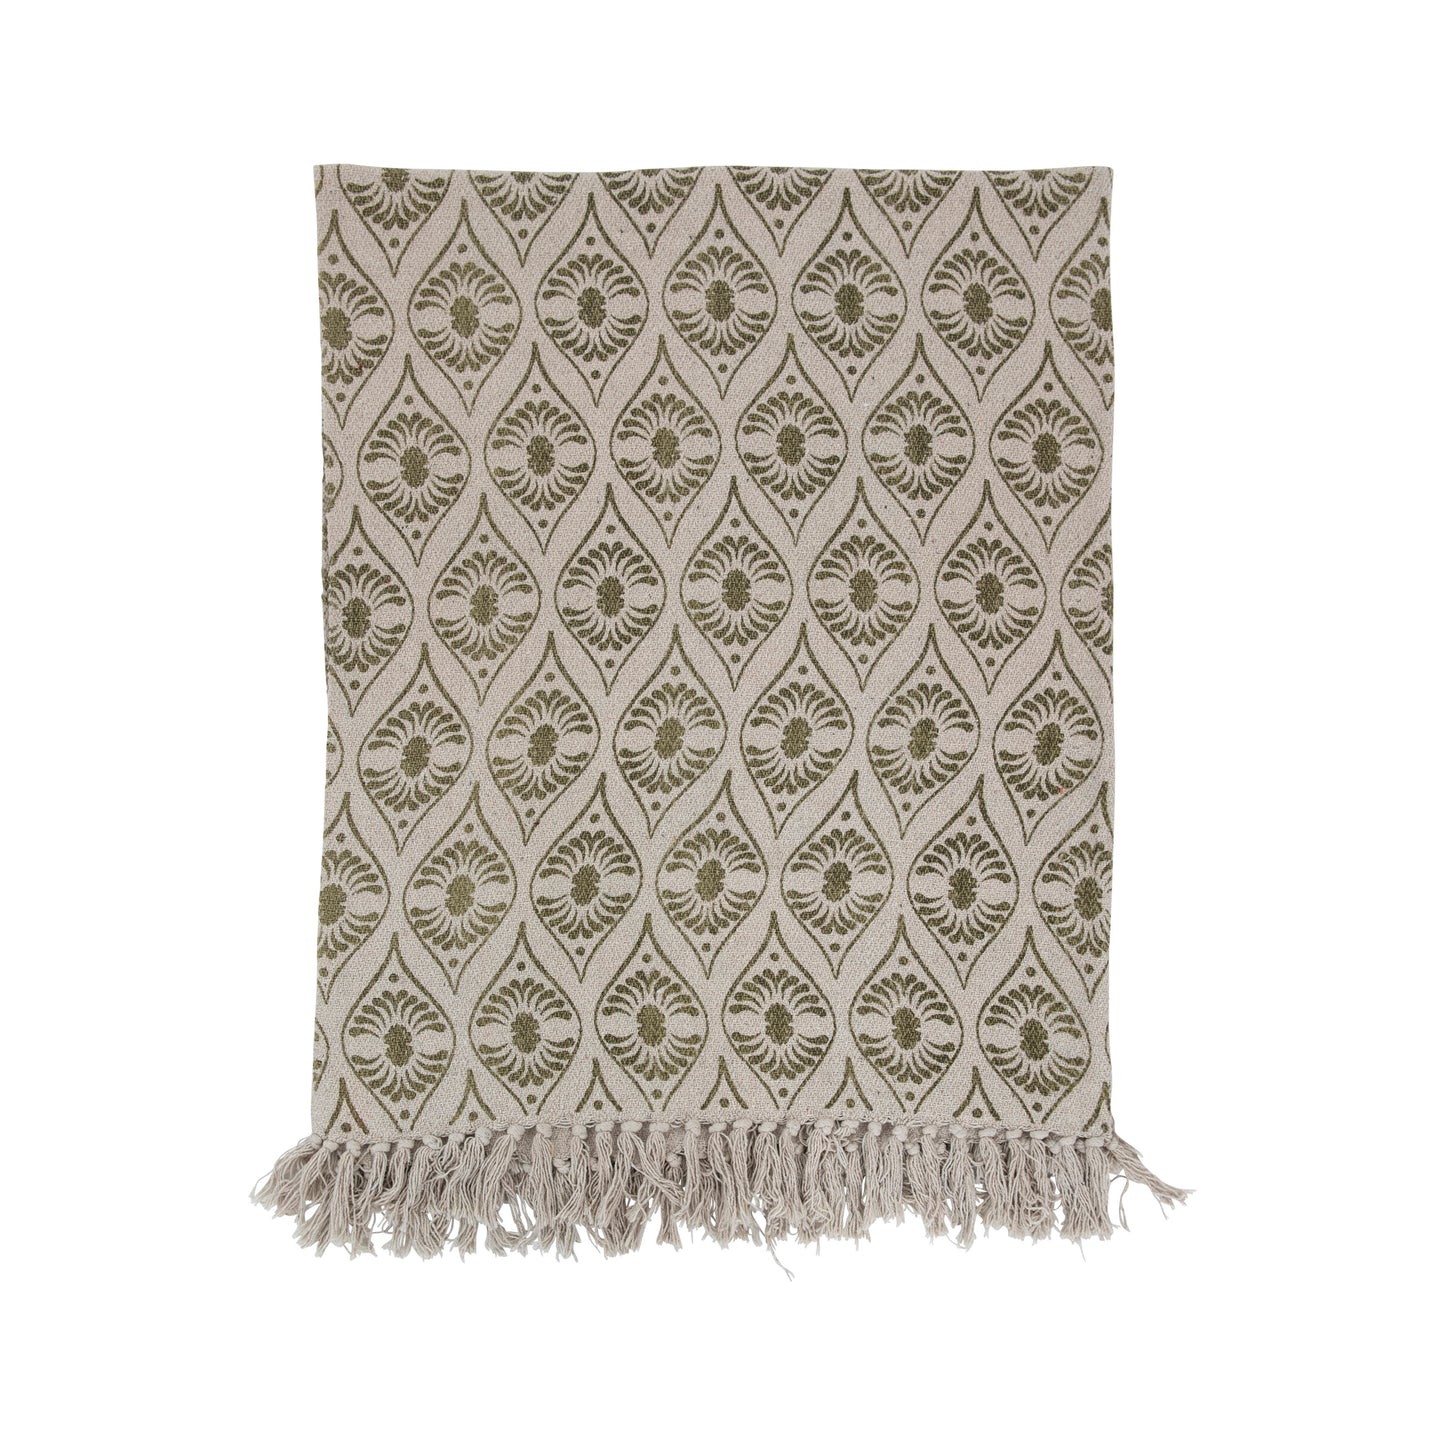 Recycled Cotton Blend Printed Throw w/ Fringe | Green Printed Pattern